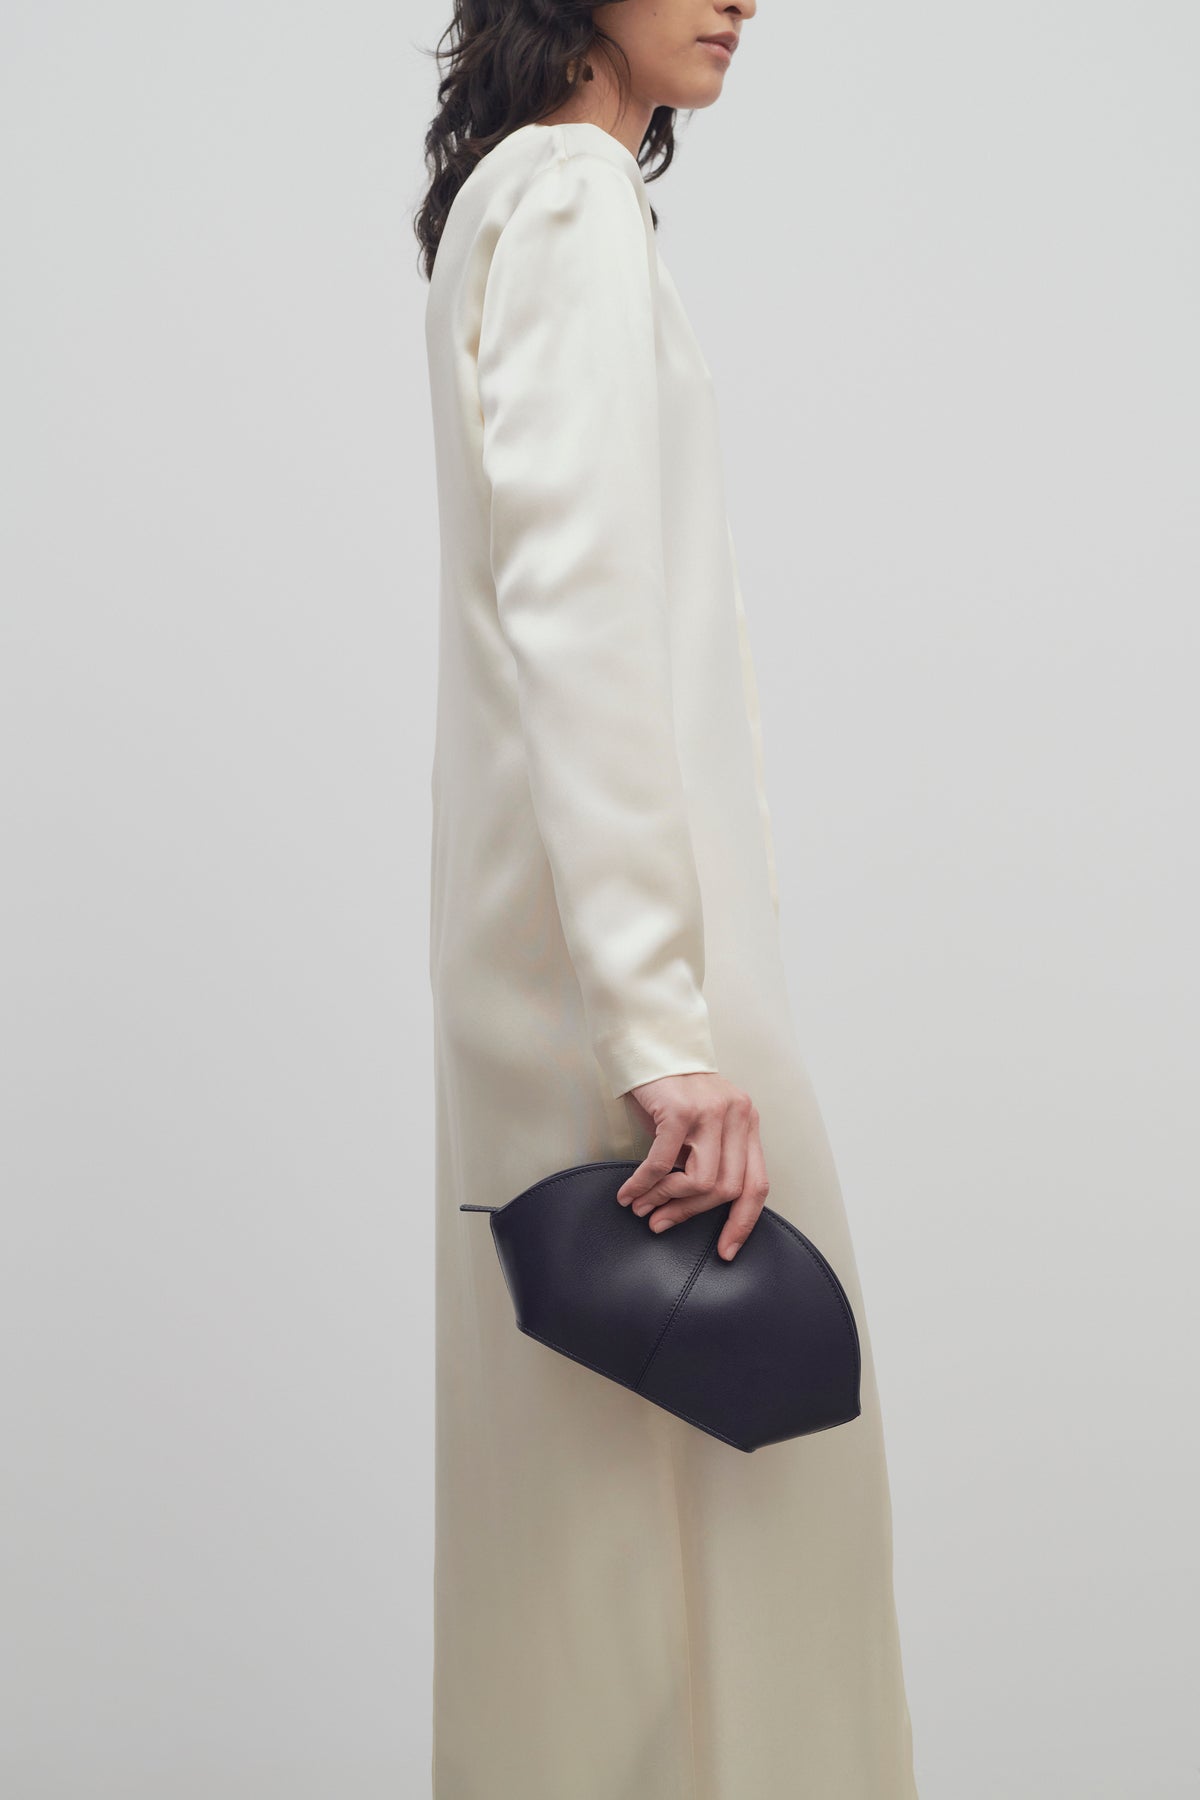 Mel Clutch in Leather